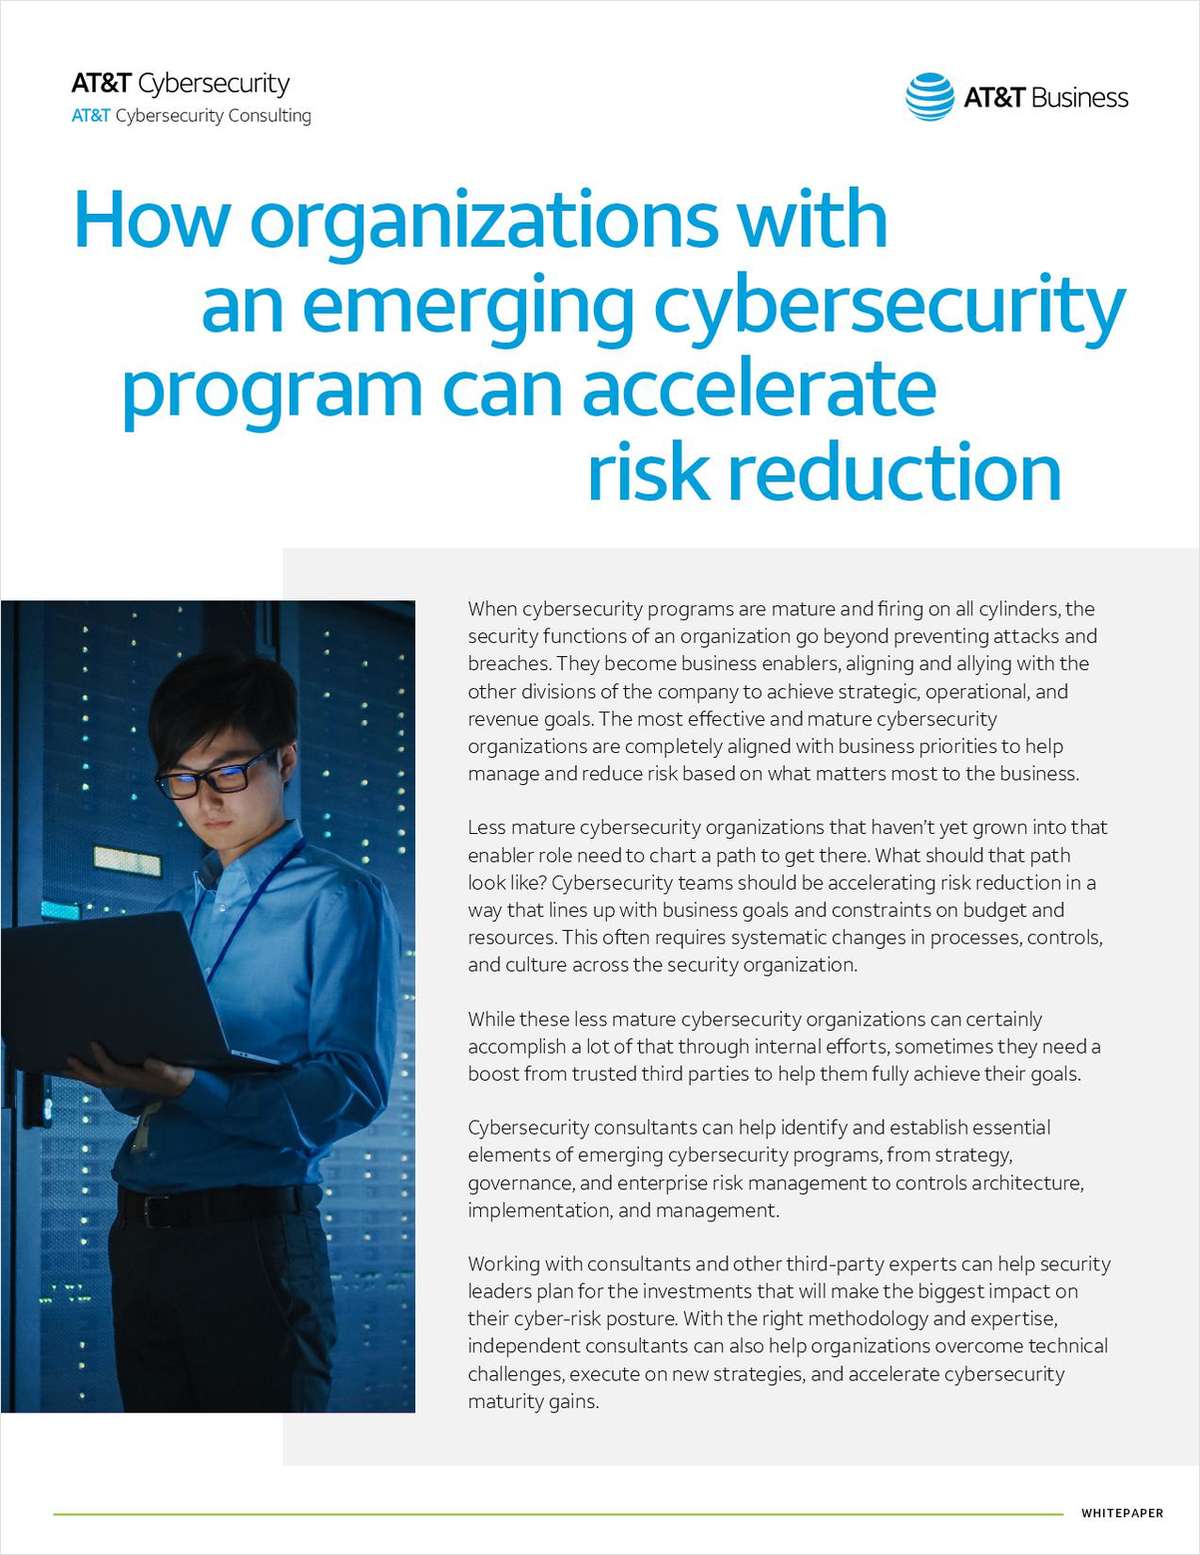 How Organizations with an Emerging Cybersecurity Program can Accelerate Risk Reduction